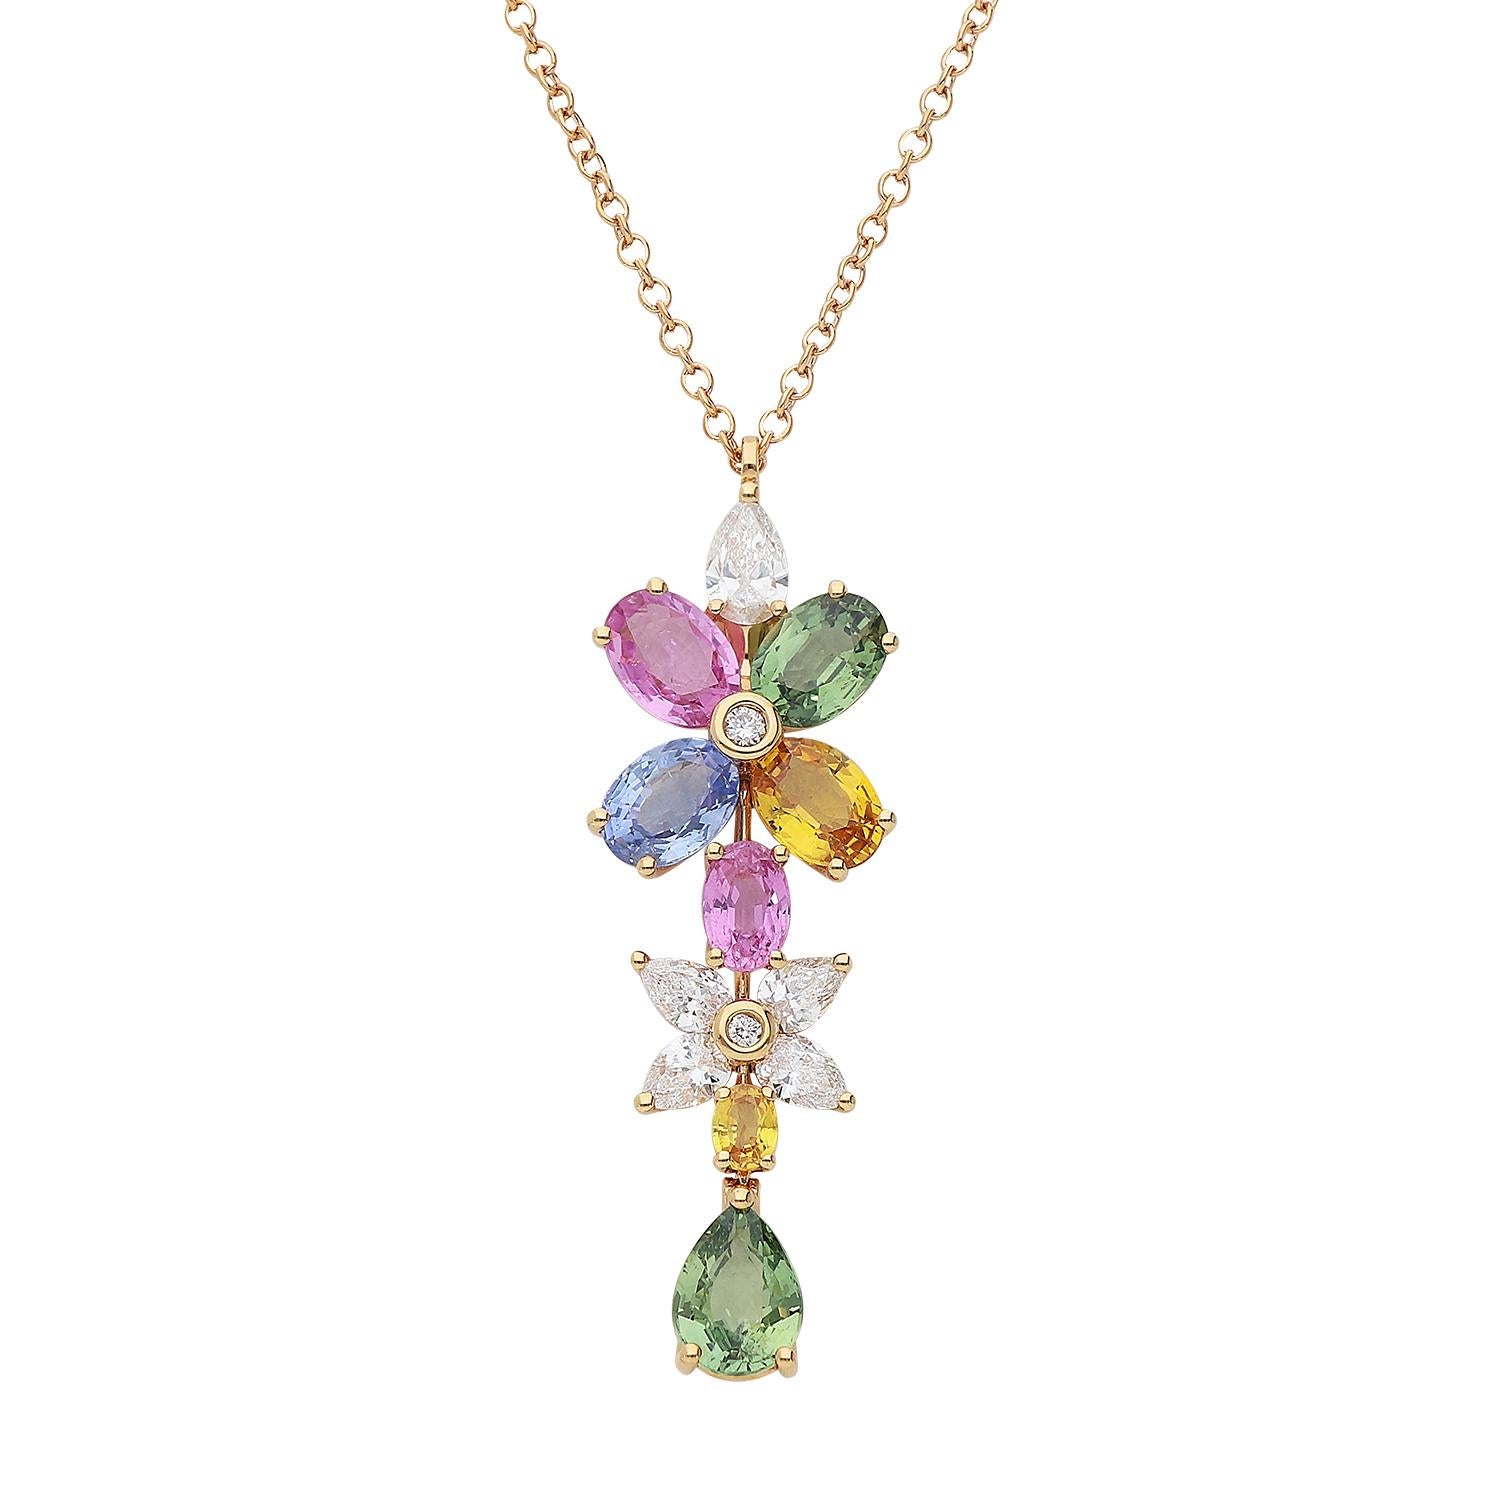 An elegant 18kt rose gold pendant choker weighing a total of 6 grams with a floral motif pendant featuring sapphires and diamonds of different cuts: the multi-color sapphires are oval and teardrop cut, totaling 6.19 carats, while the diamonds are